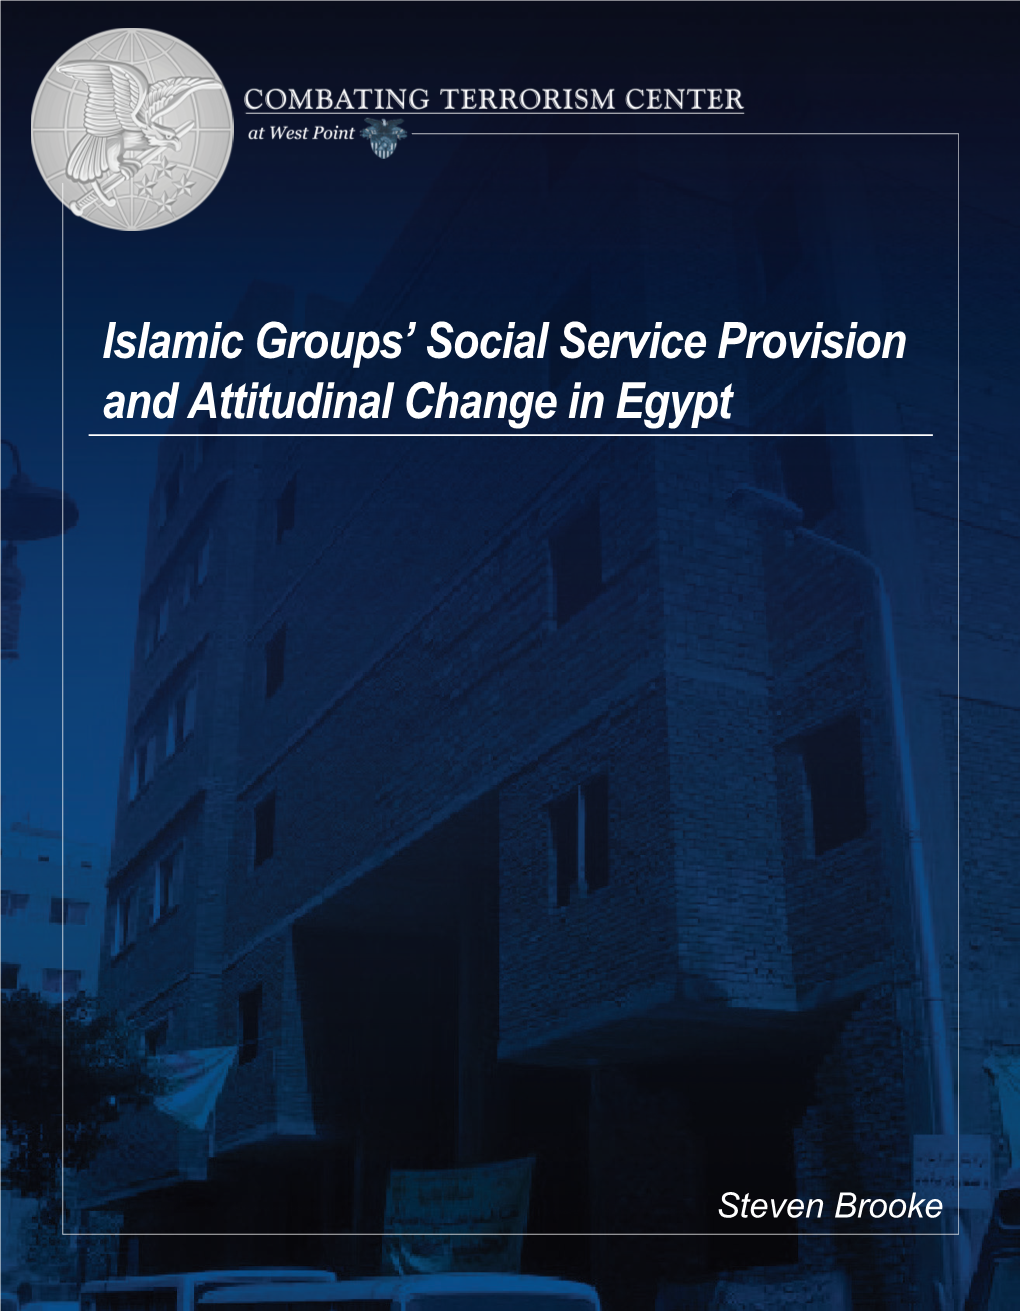 Islamic Groups' Social Service Provision and Attitudinal Change In